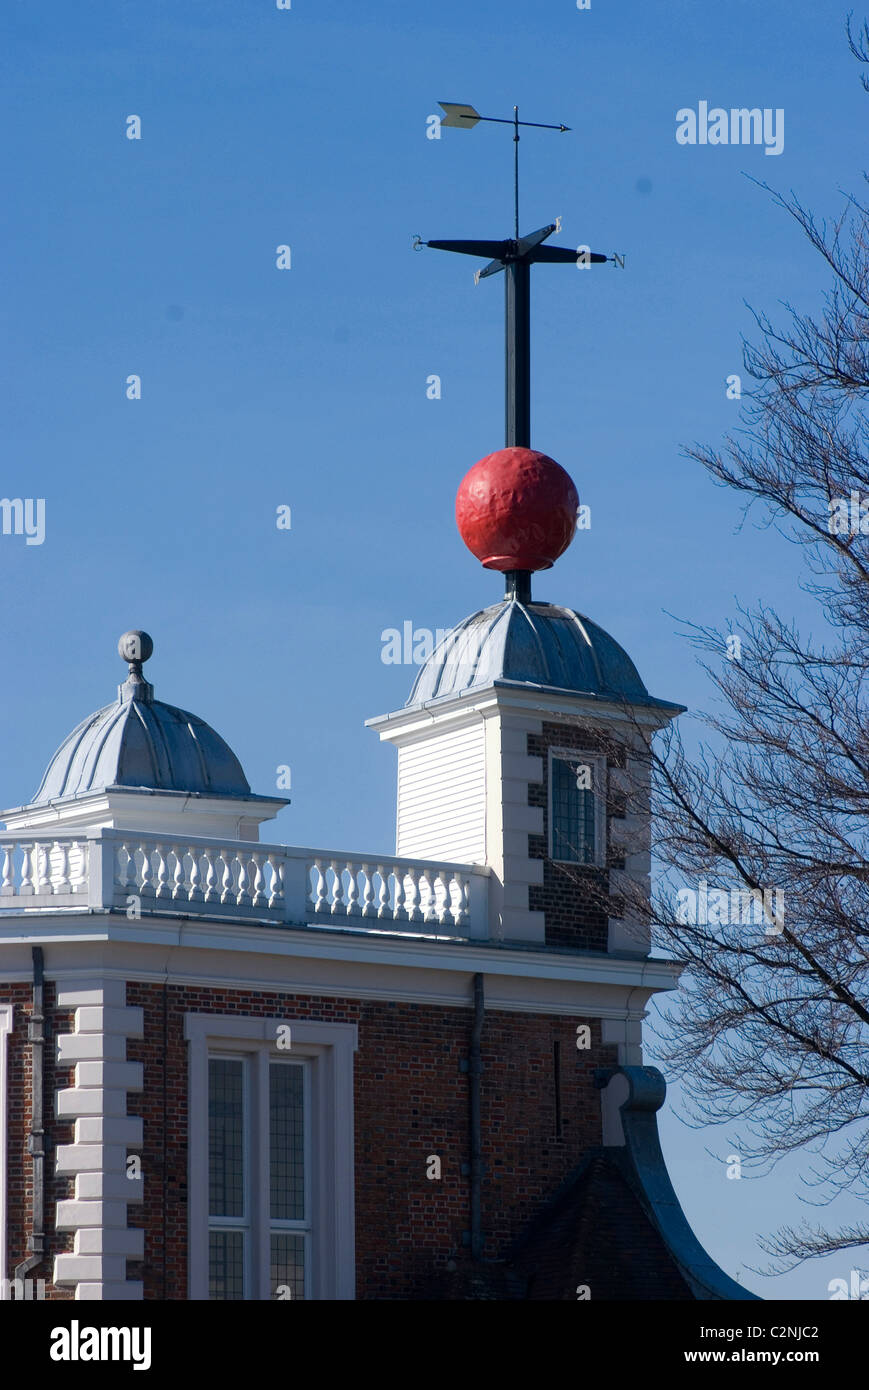 Detail of the Time Ball on top of the Old Royal Greenwich Observatory, Greenwich Park, Greenwich, SE10, England Stock Photo